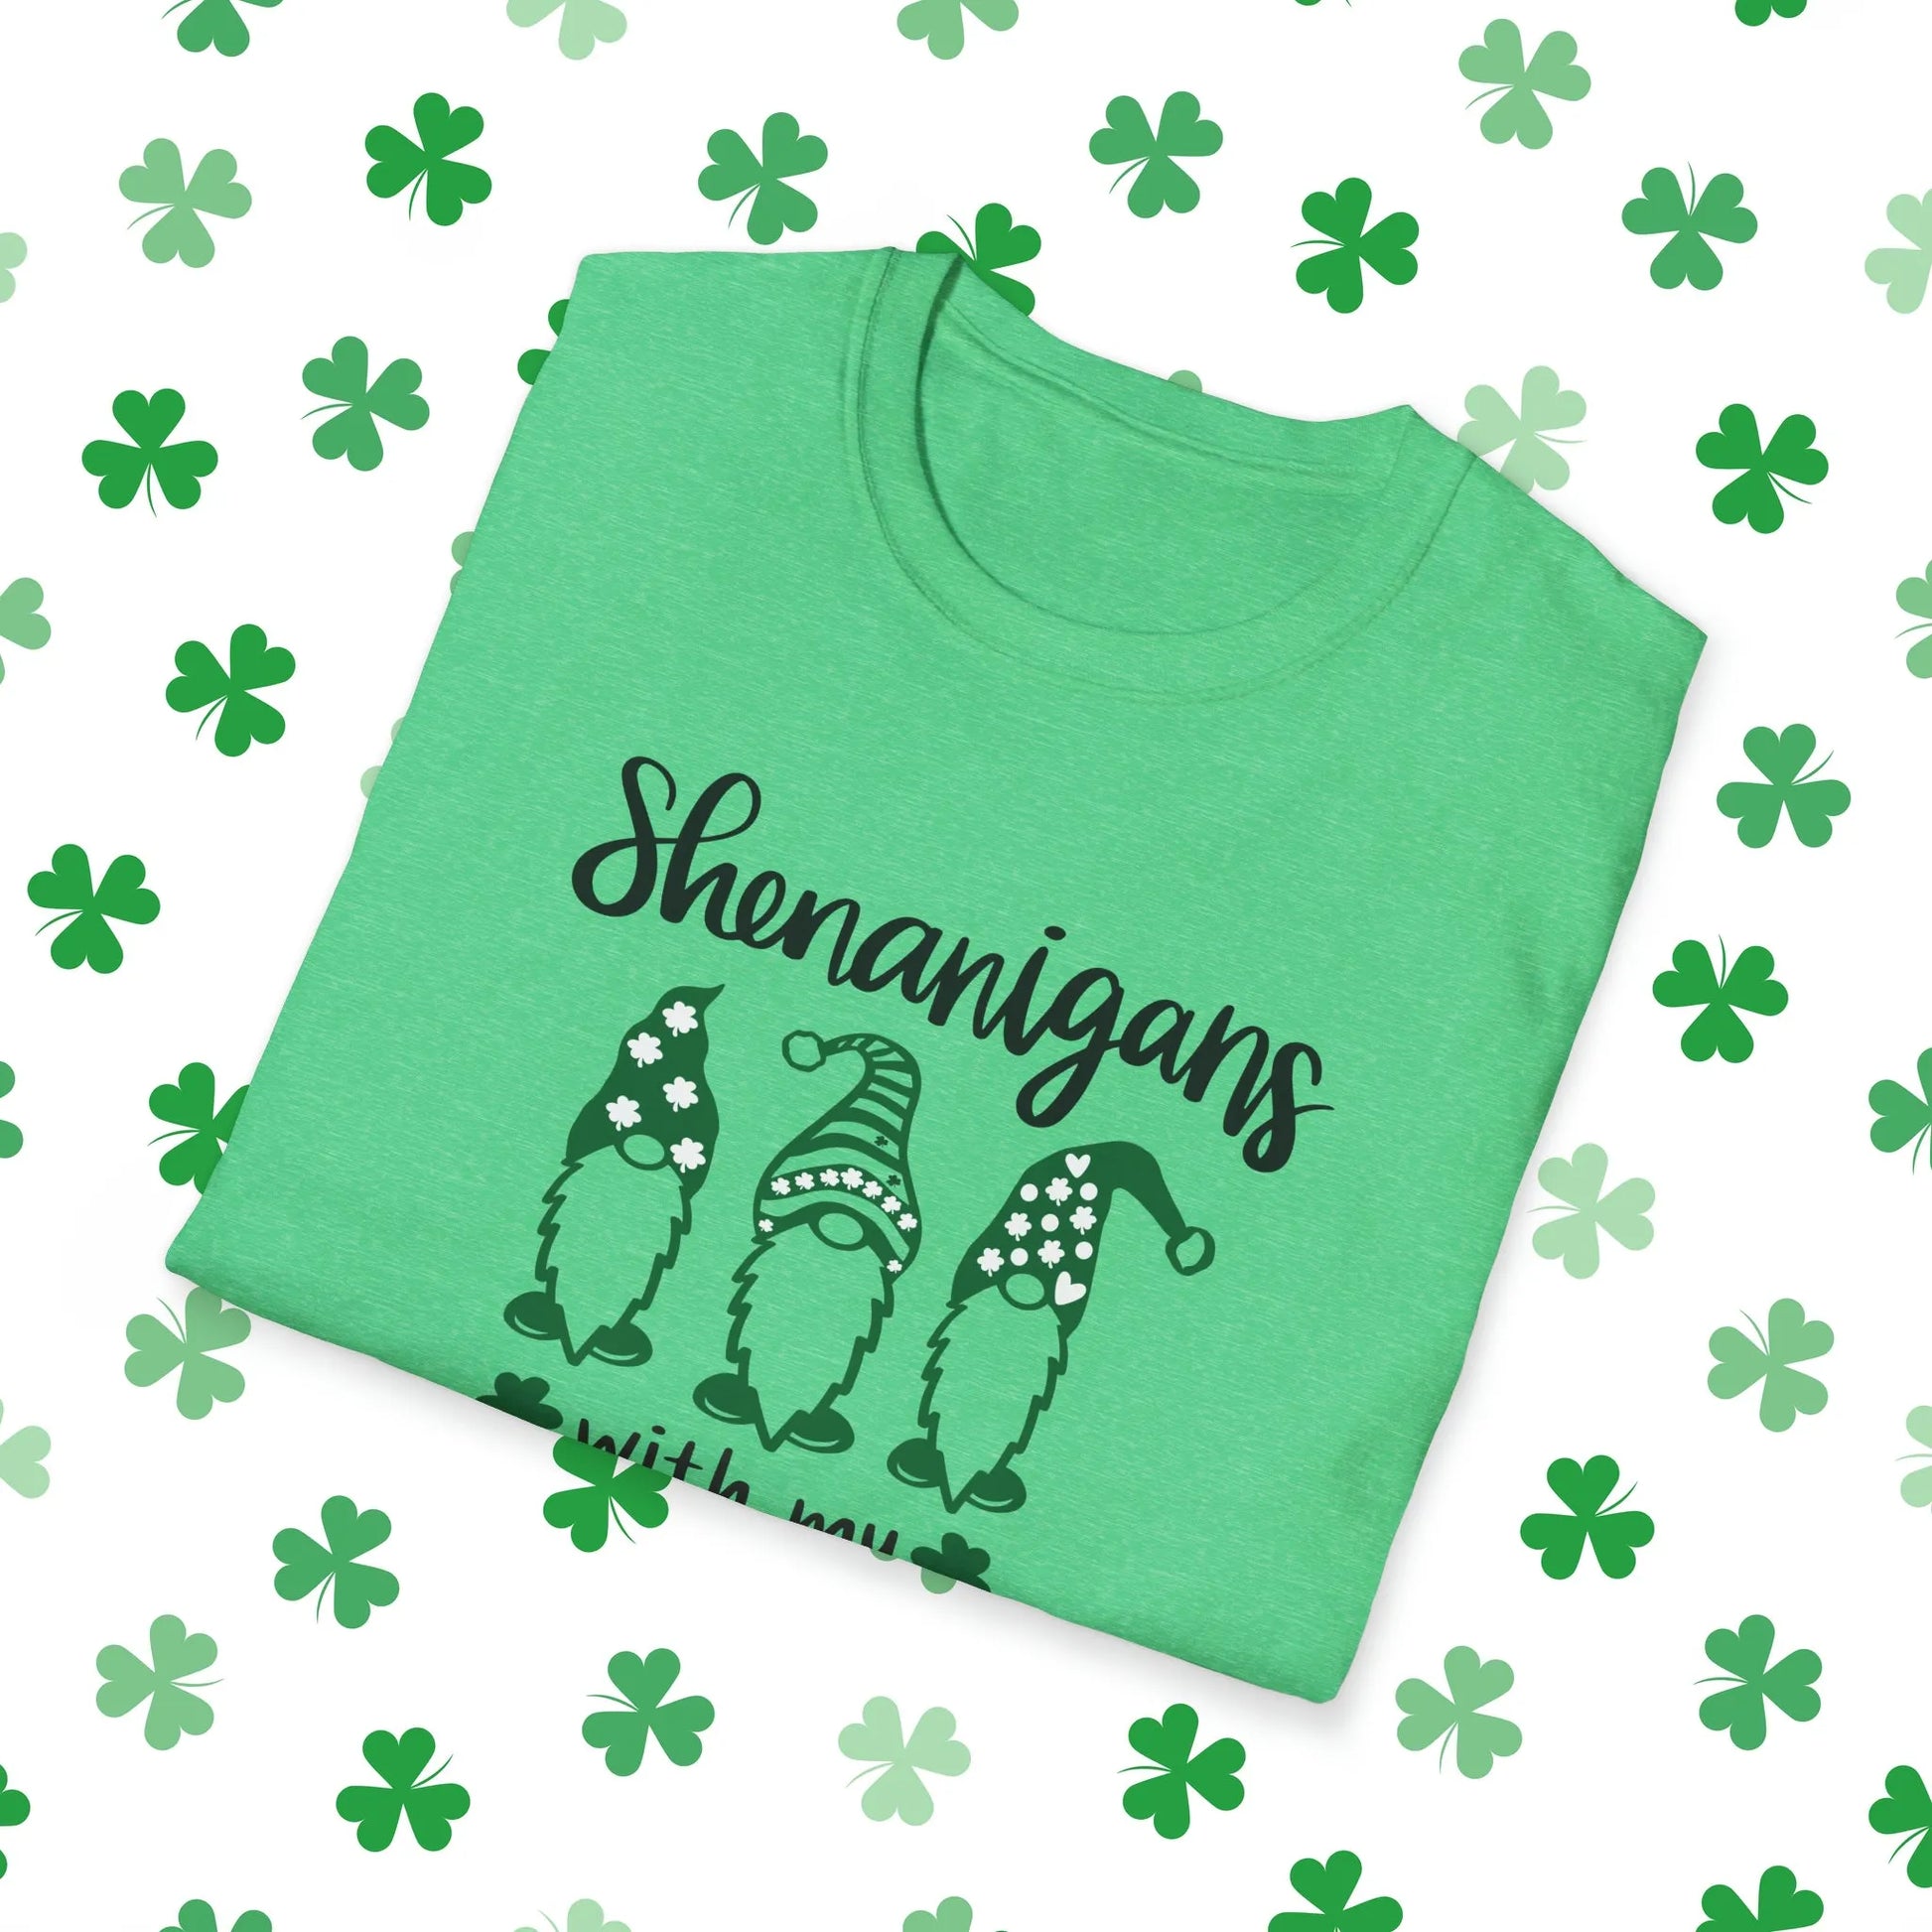 Shenangigans With My Gnomies St. Patrick's Day T-Shirt - Shenangigans With My Gnomies Shirt